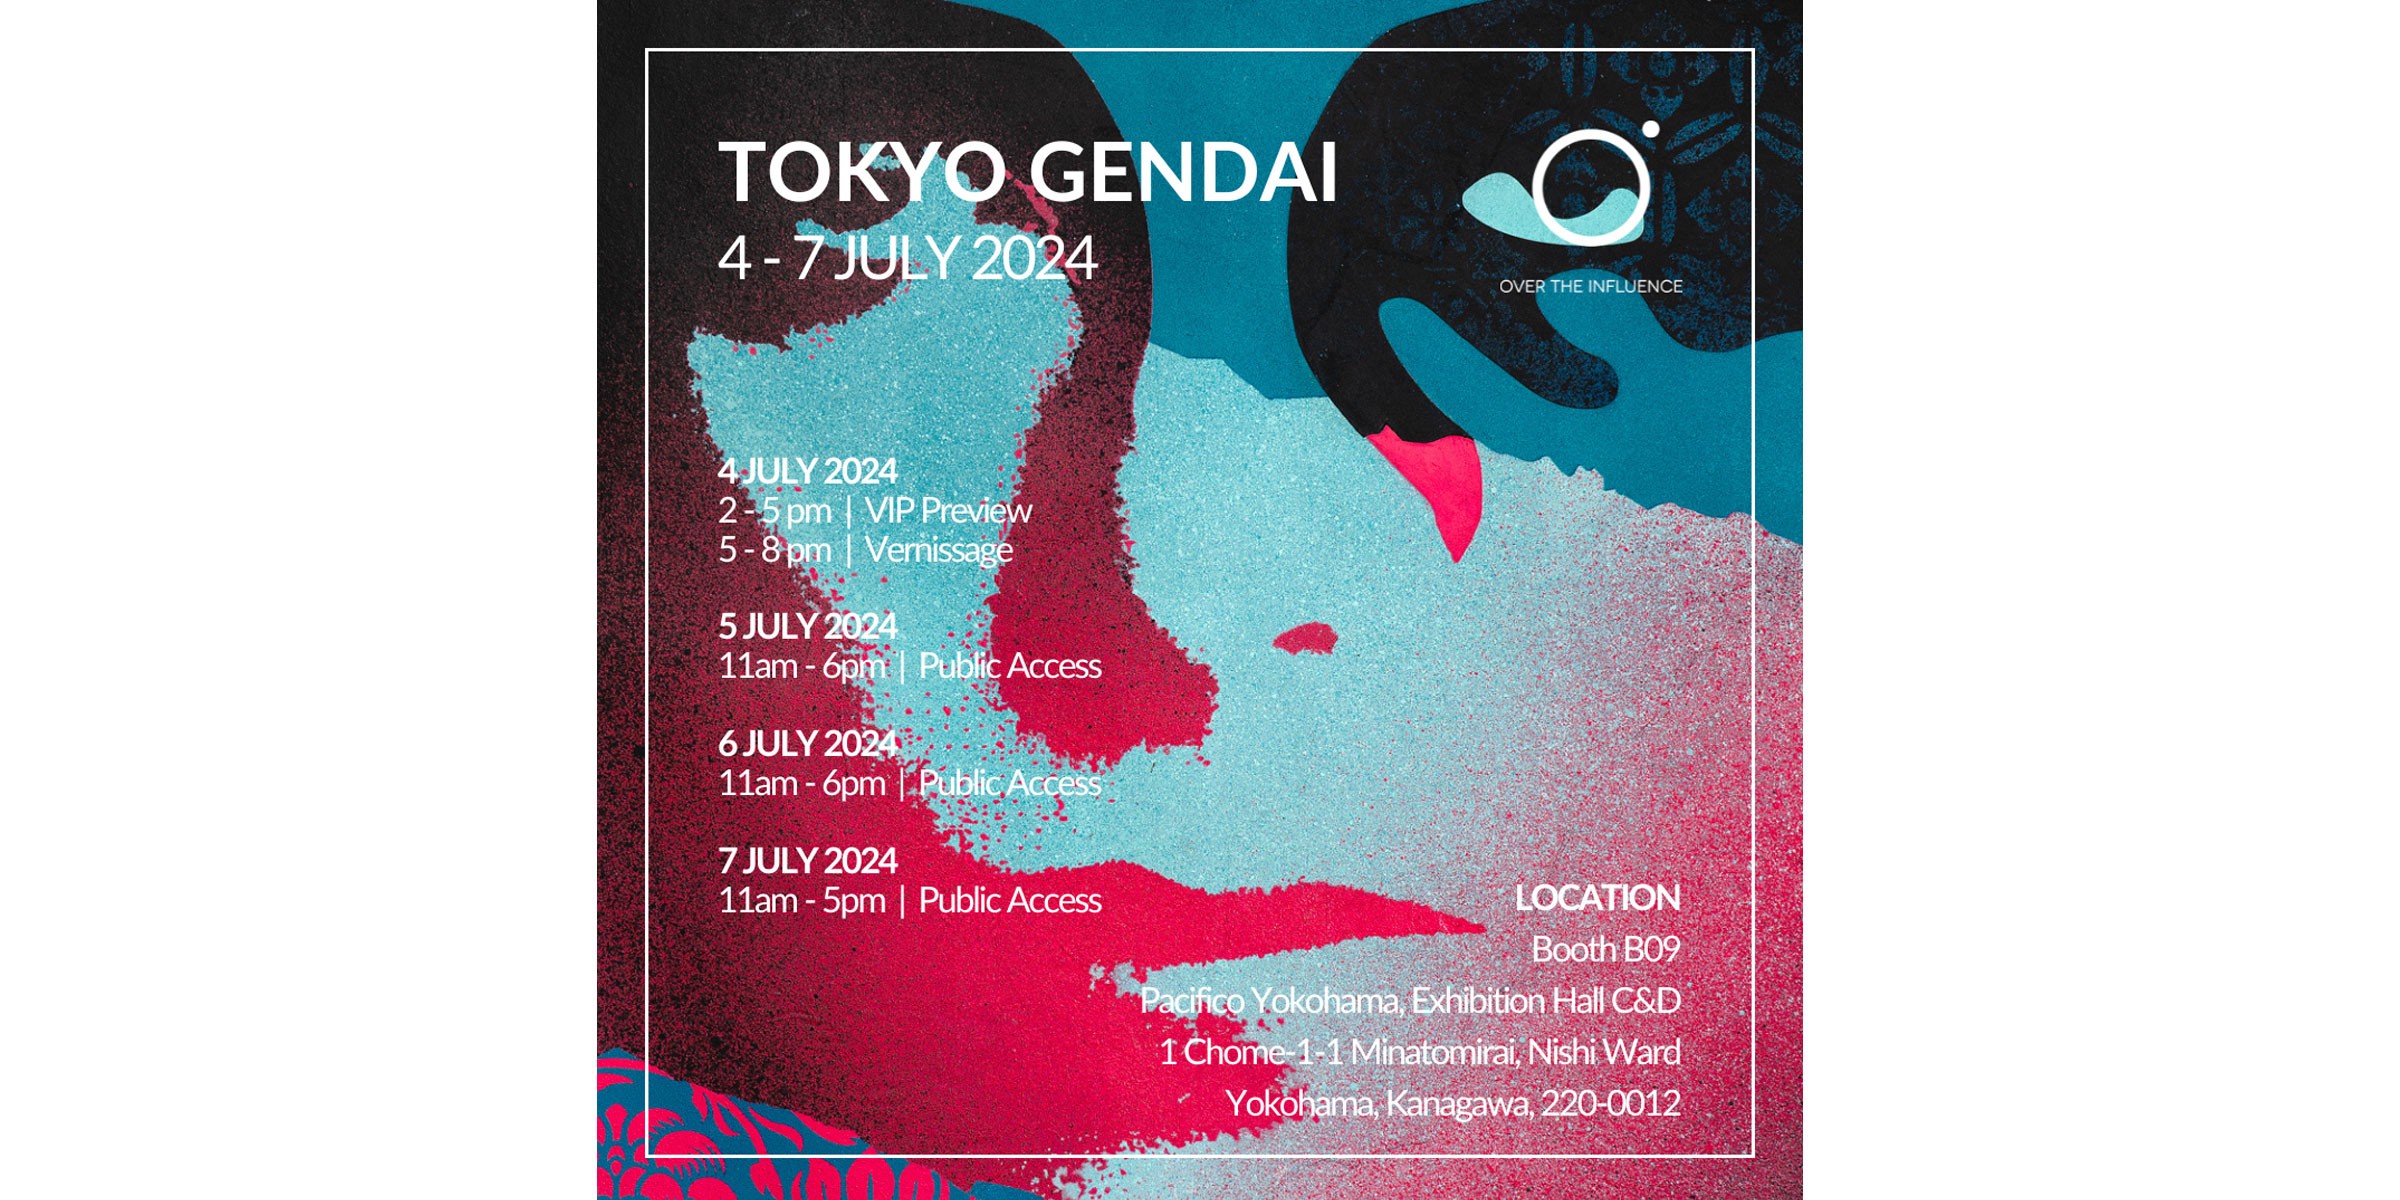 Tokyo Gendai and Over the Influence 2024